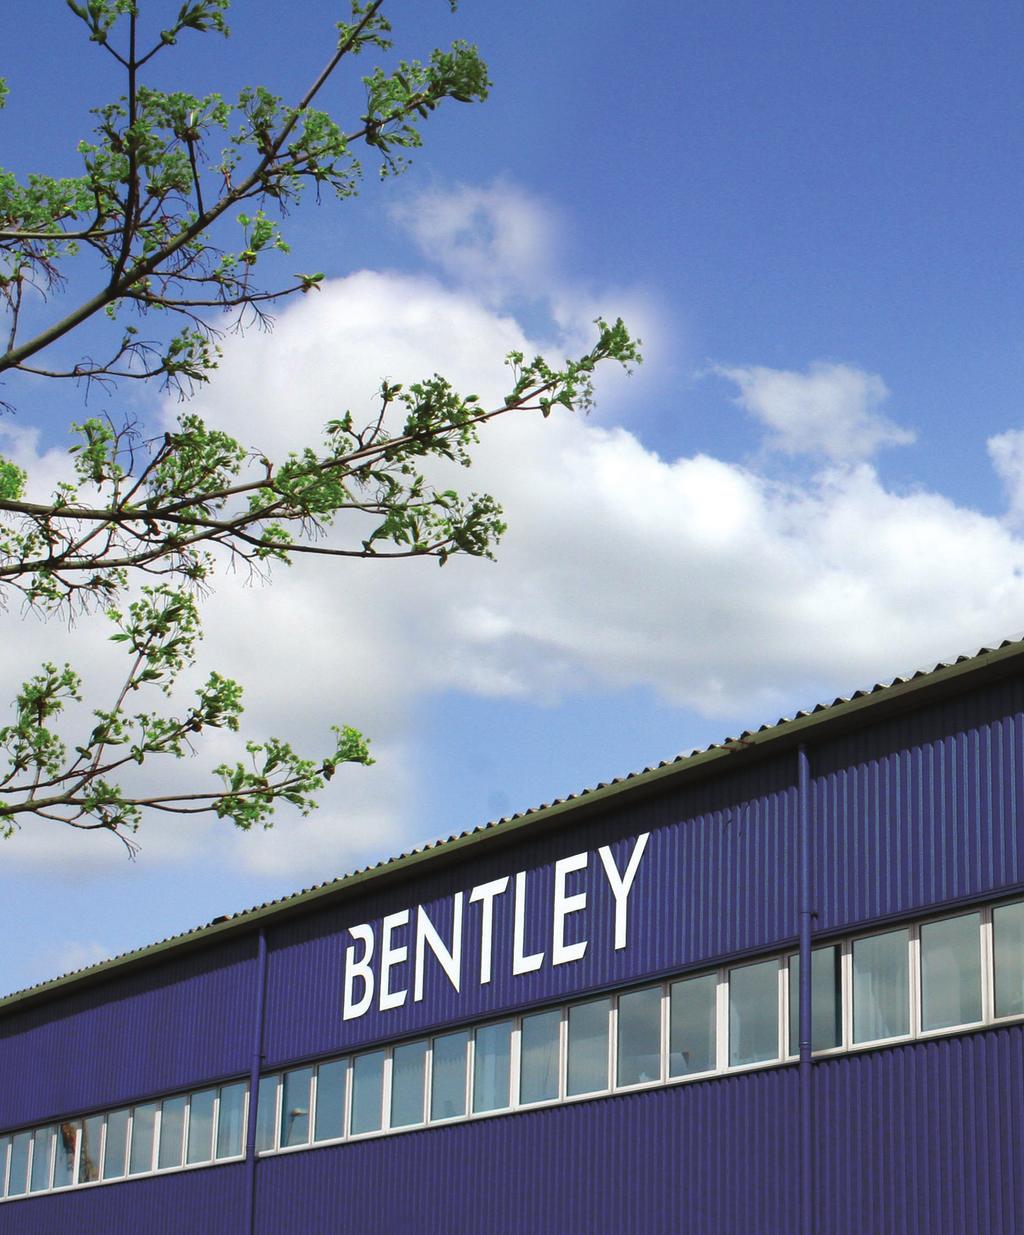 AB O U T U S Charles Bentley are global manufacturers & suppliers of Home, Garden & Leisure products with an extensive portfolio, from premium designer ranges to everyday essential products.